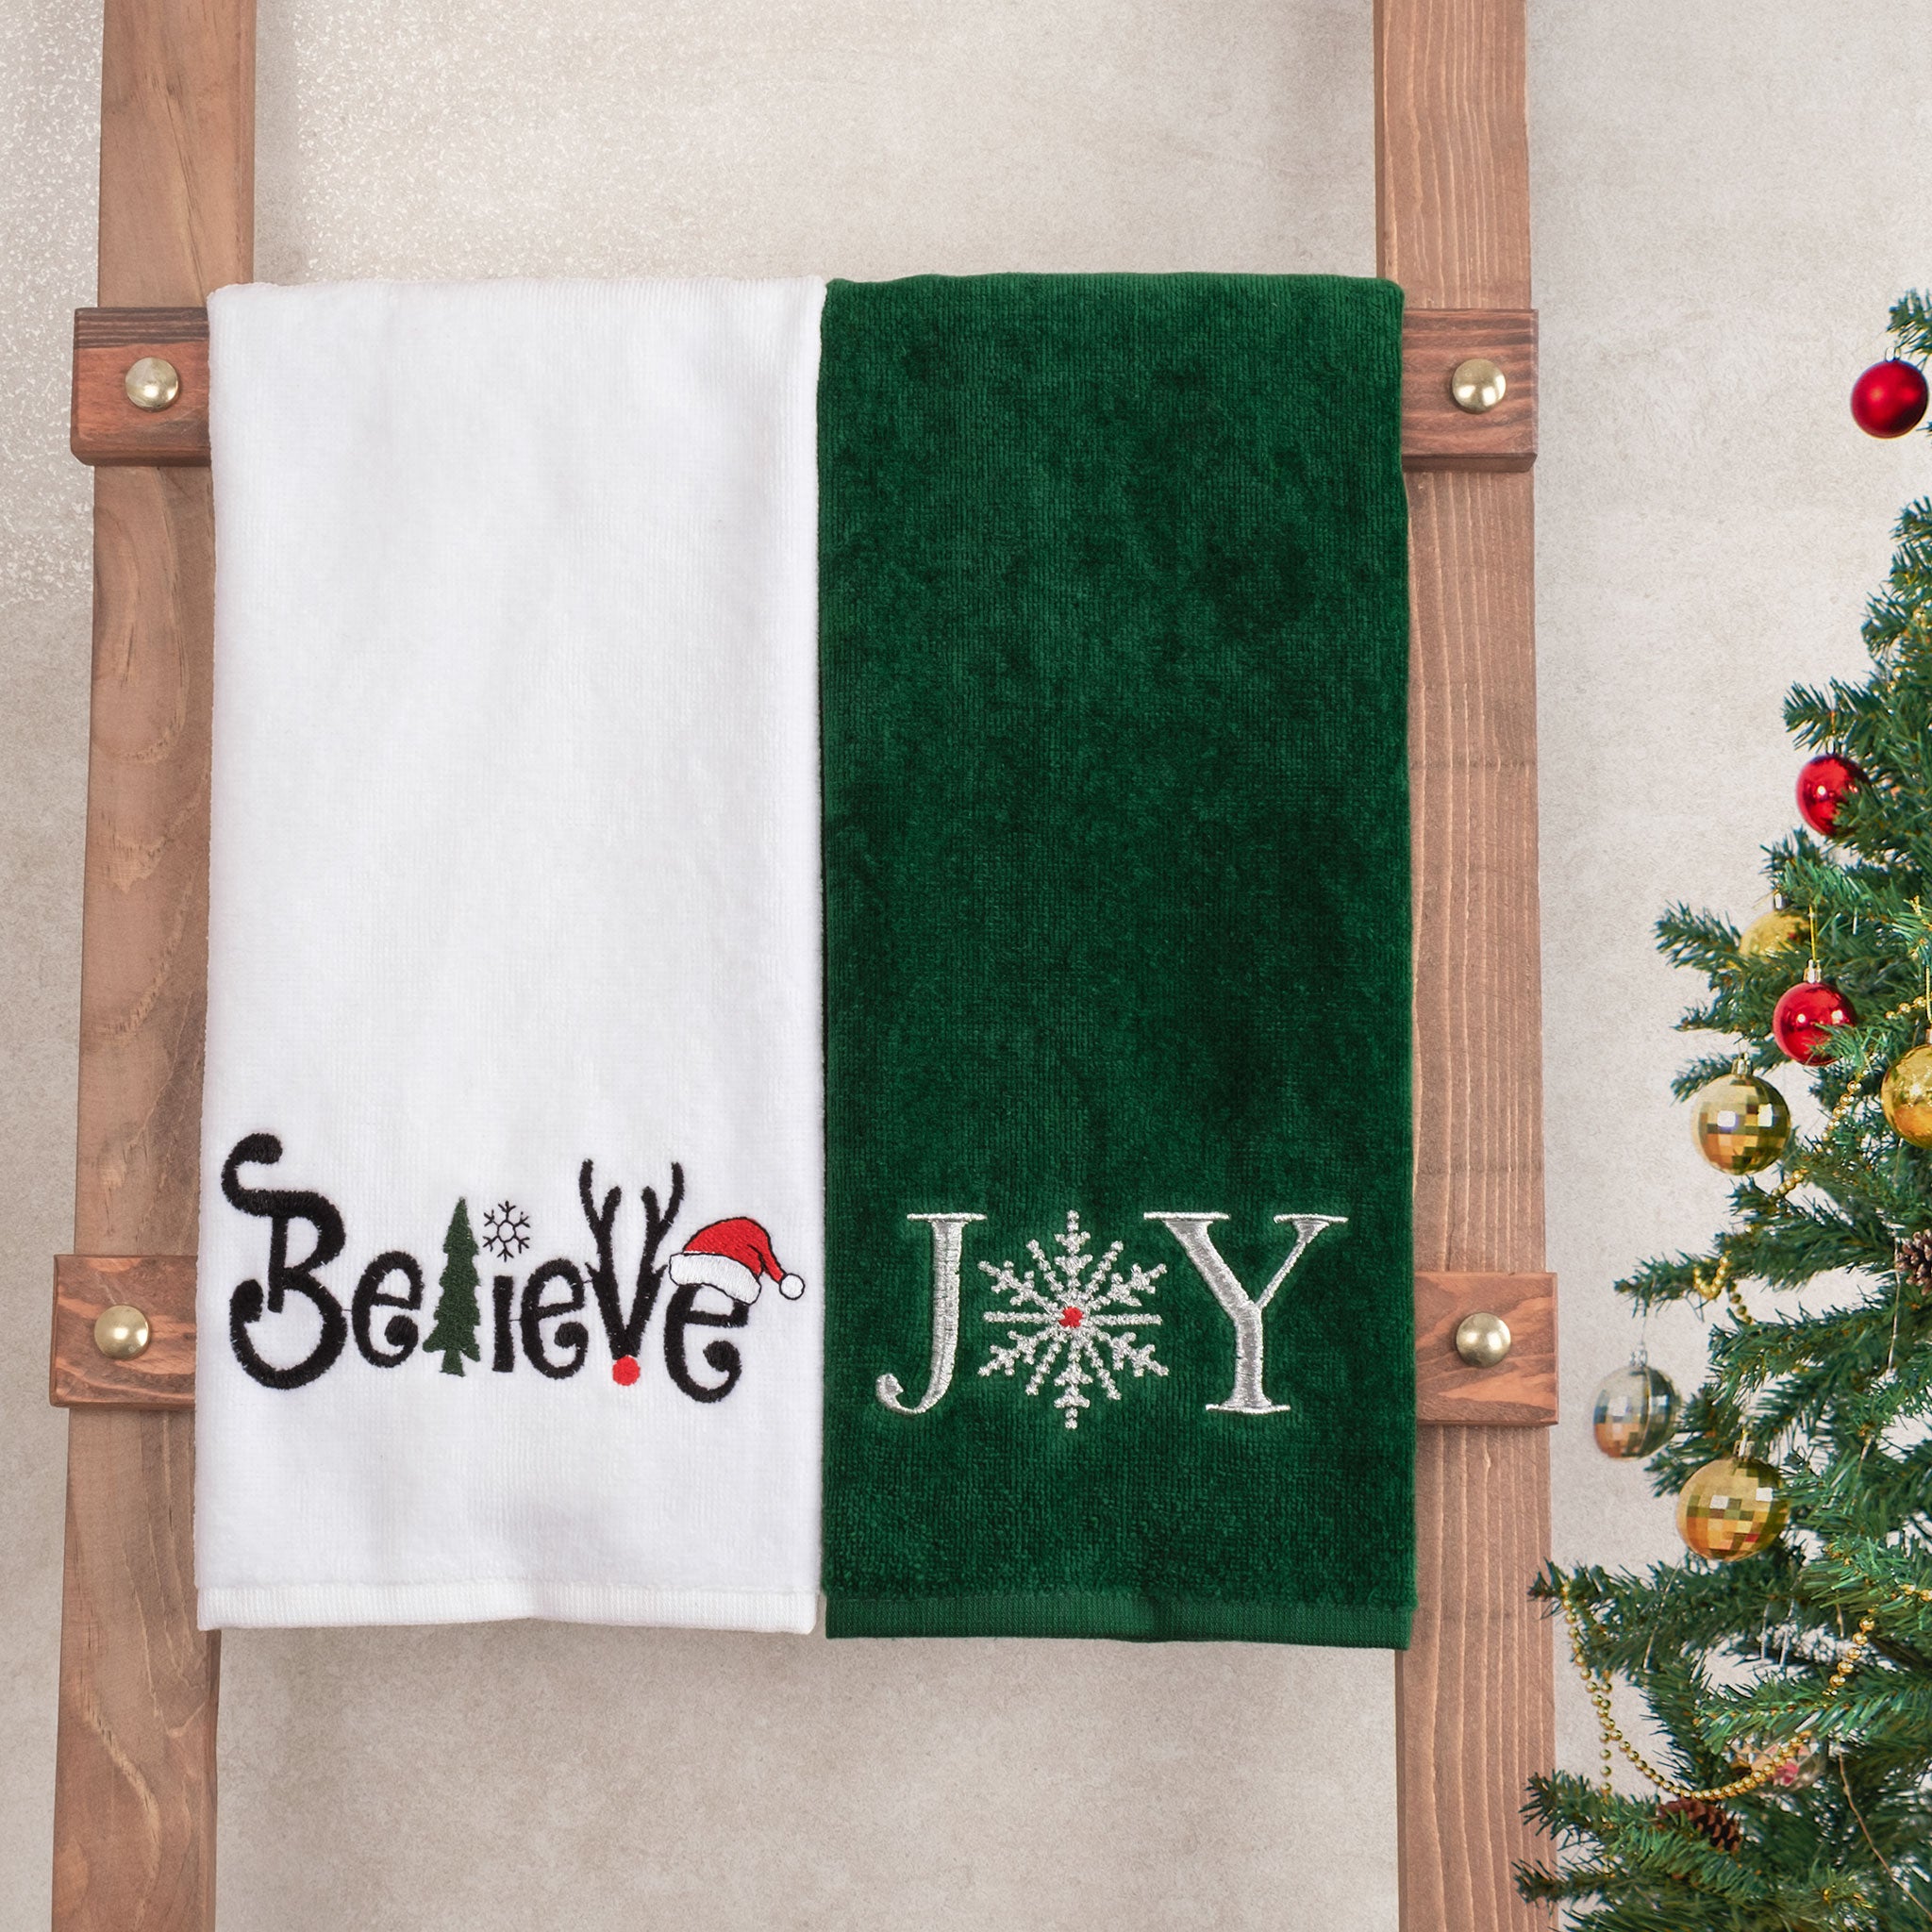 American Soft Linen - Christmas Towels 2 Packed Embroidered Towels for Decor Xmas - Joy-Believe - 2